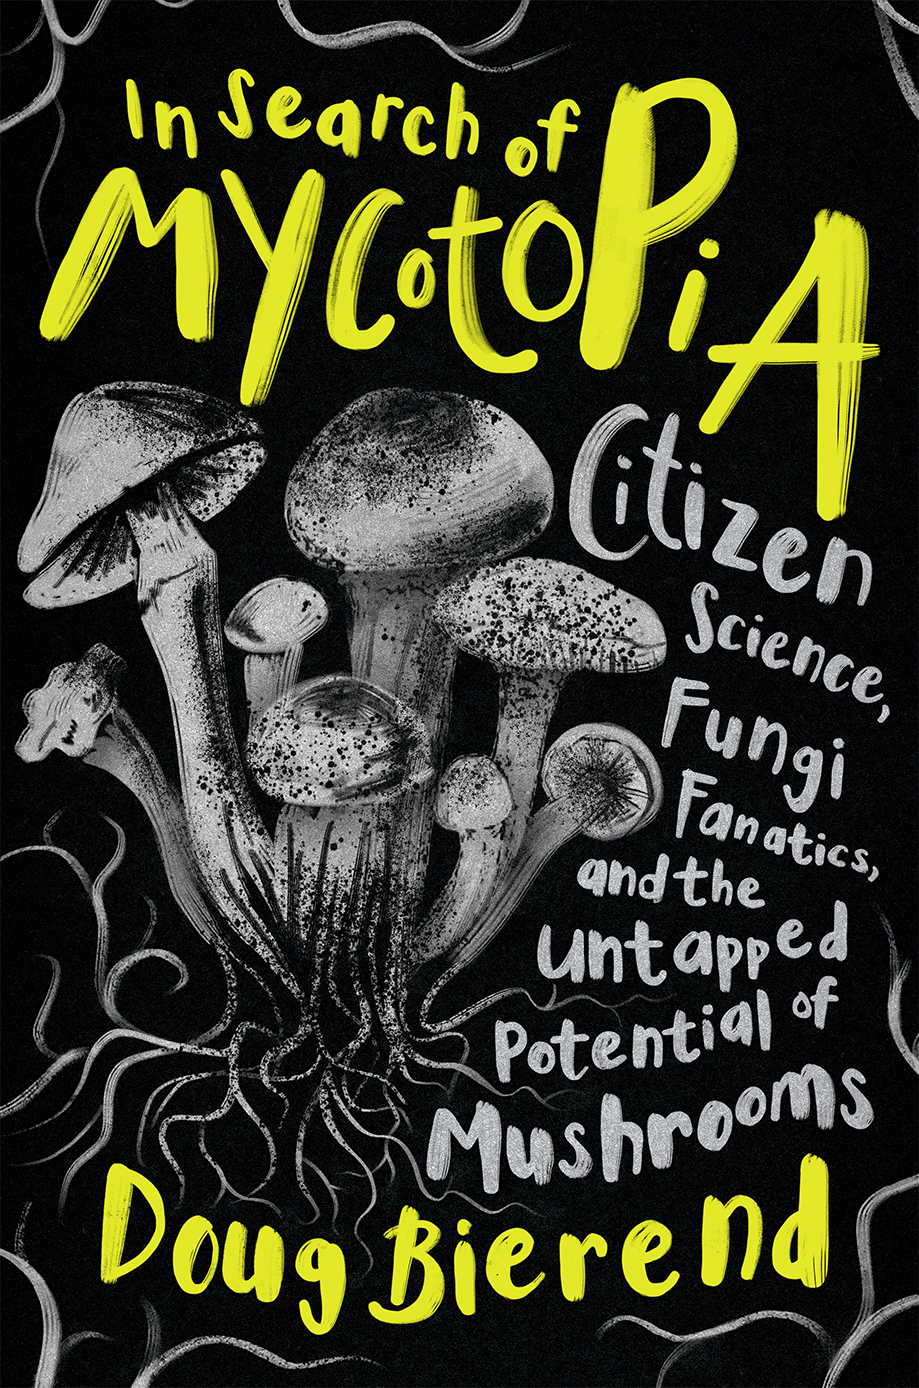 In search of mycotopia : citizen science, fungi fanatics, and the untapped potential of mushrooms image